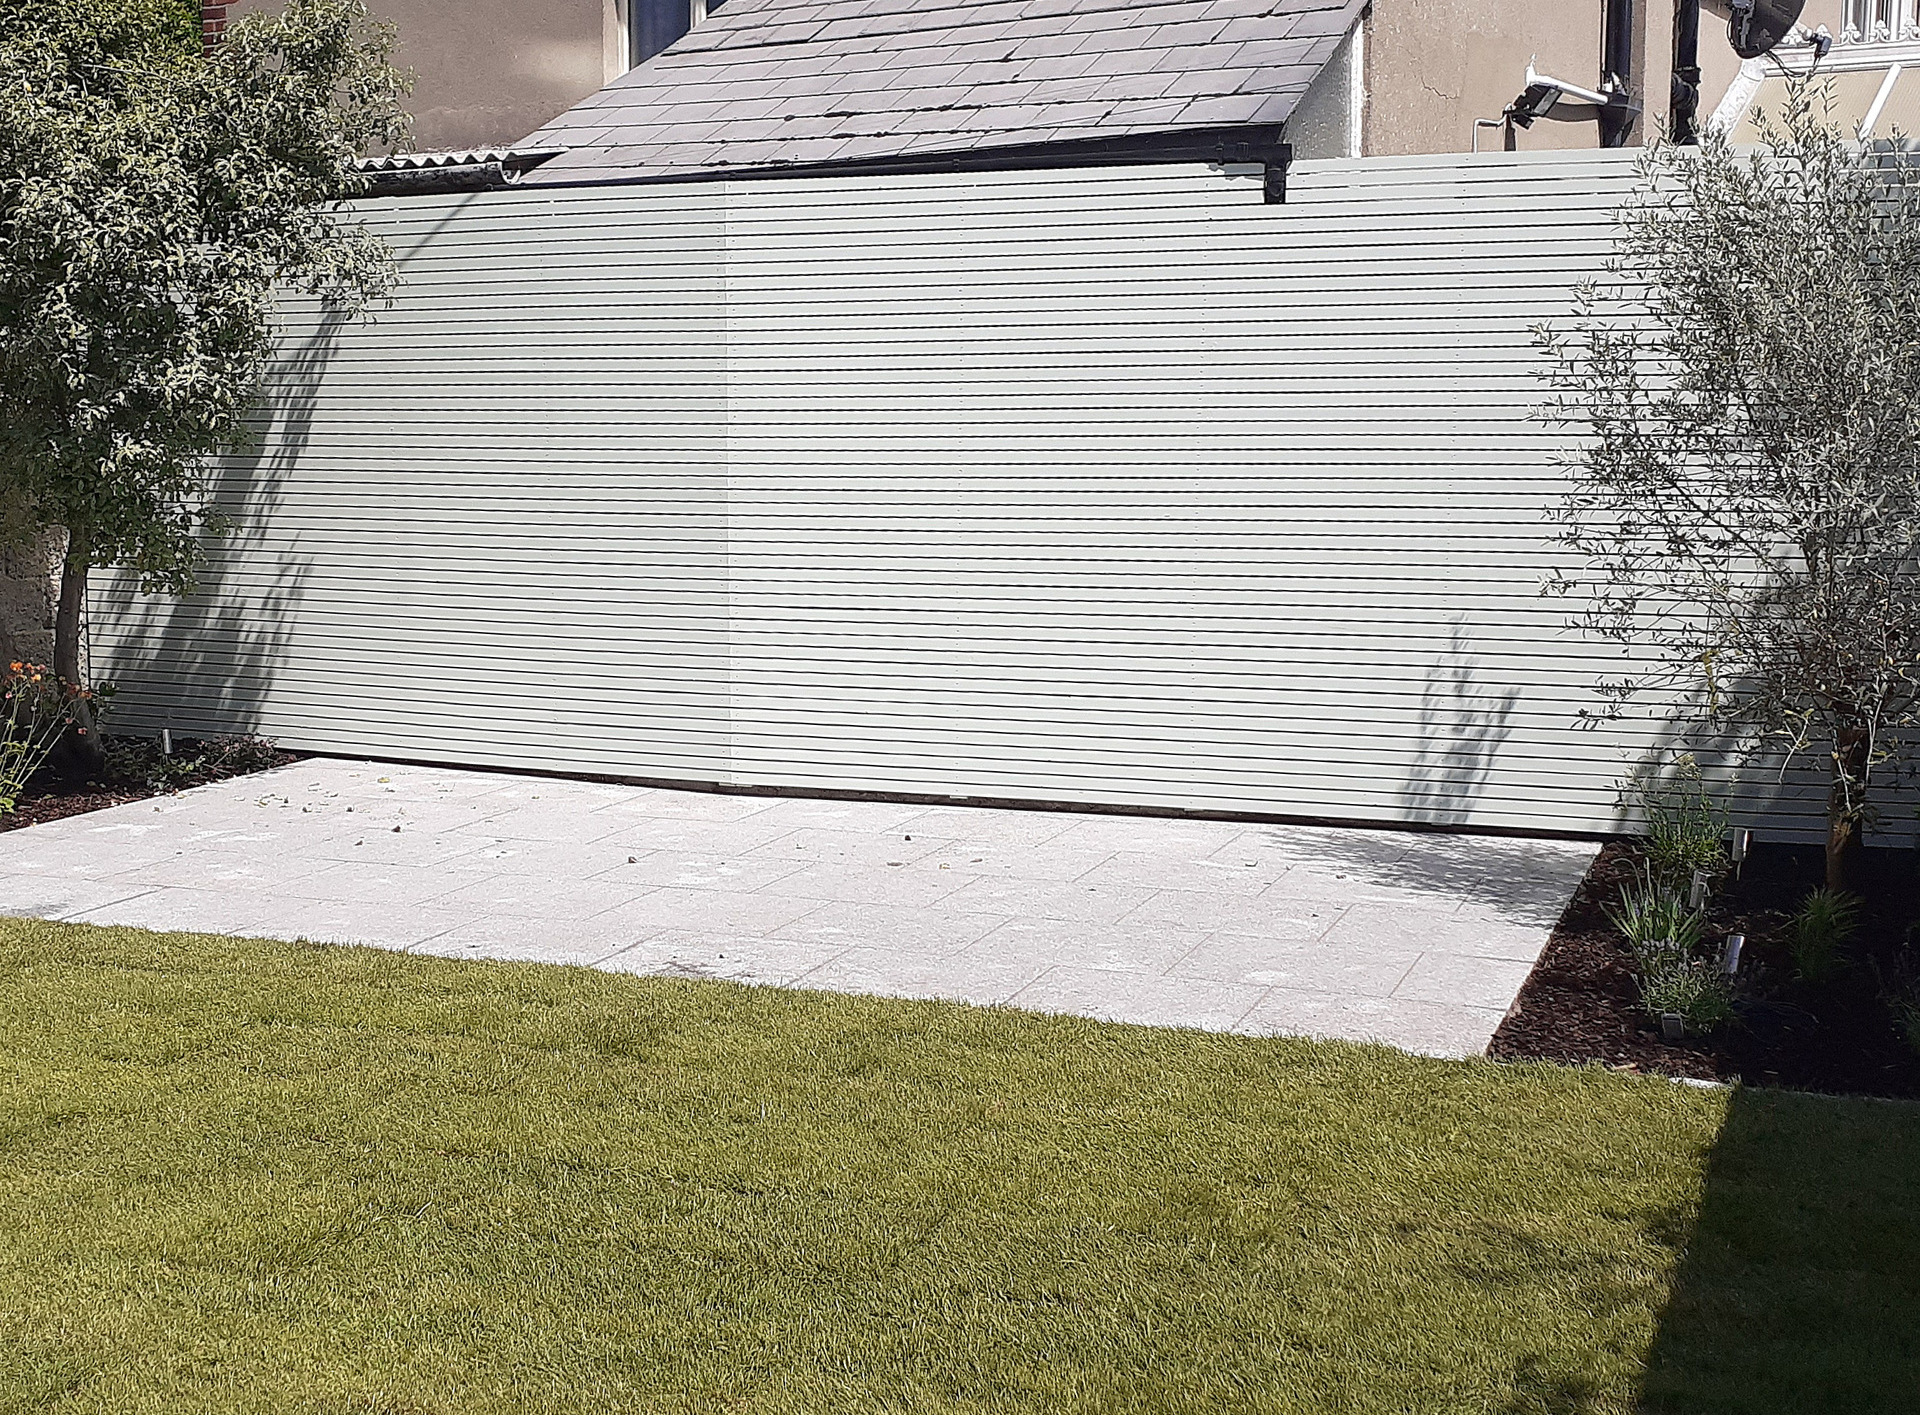 Horizontal Timber Slat Fencing with painted finish, supplied + installed in Sandymount, Dublin 4.  We have extensive experience in design & installation of bespoke & custom made fencing & screening solutions, custom made to individual customer's specific requirements.  Custom made = Better made.